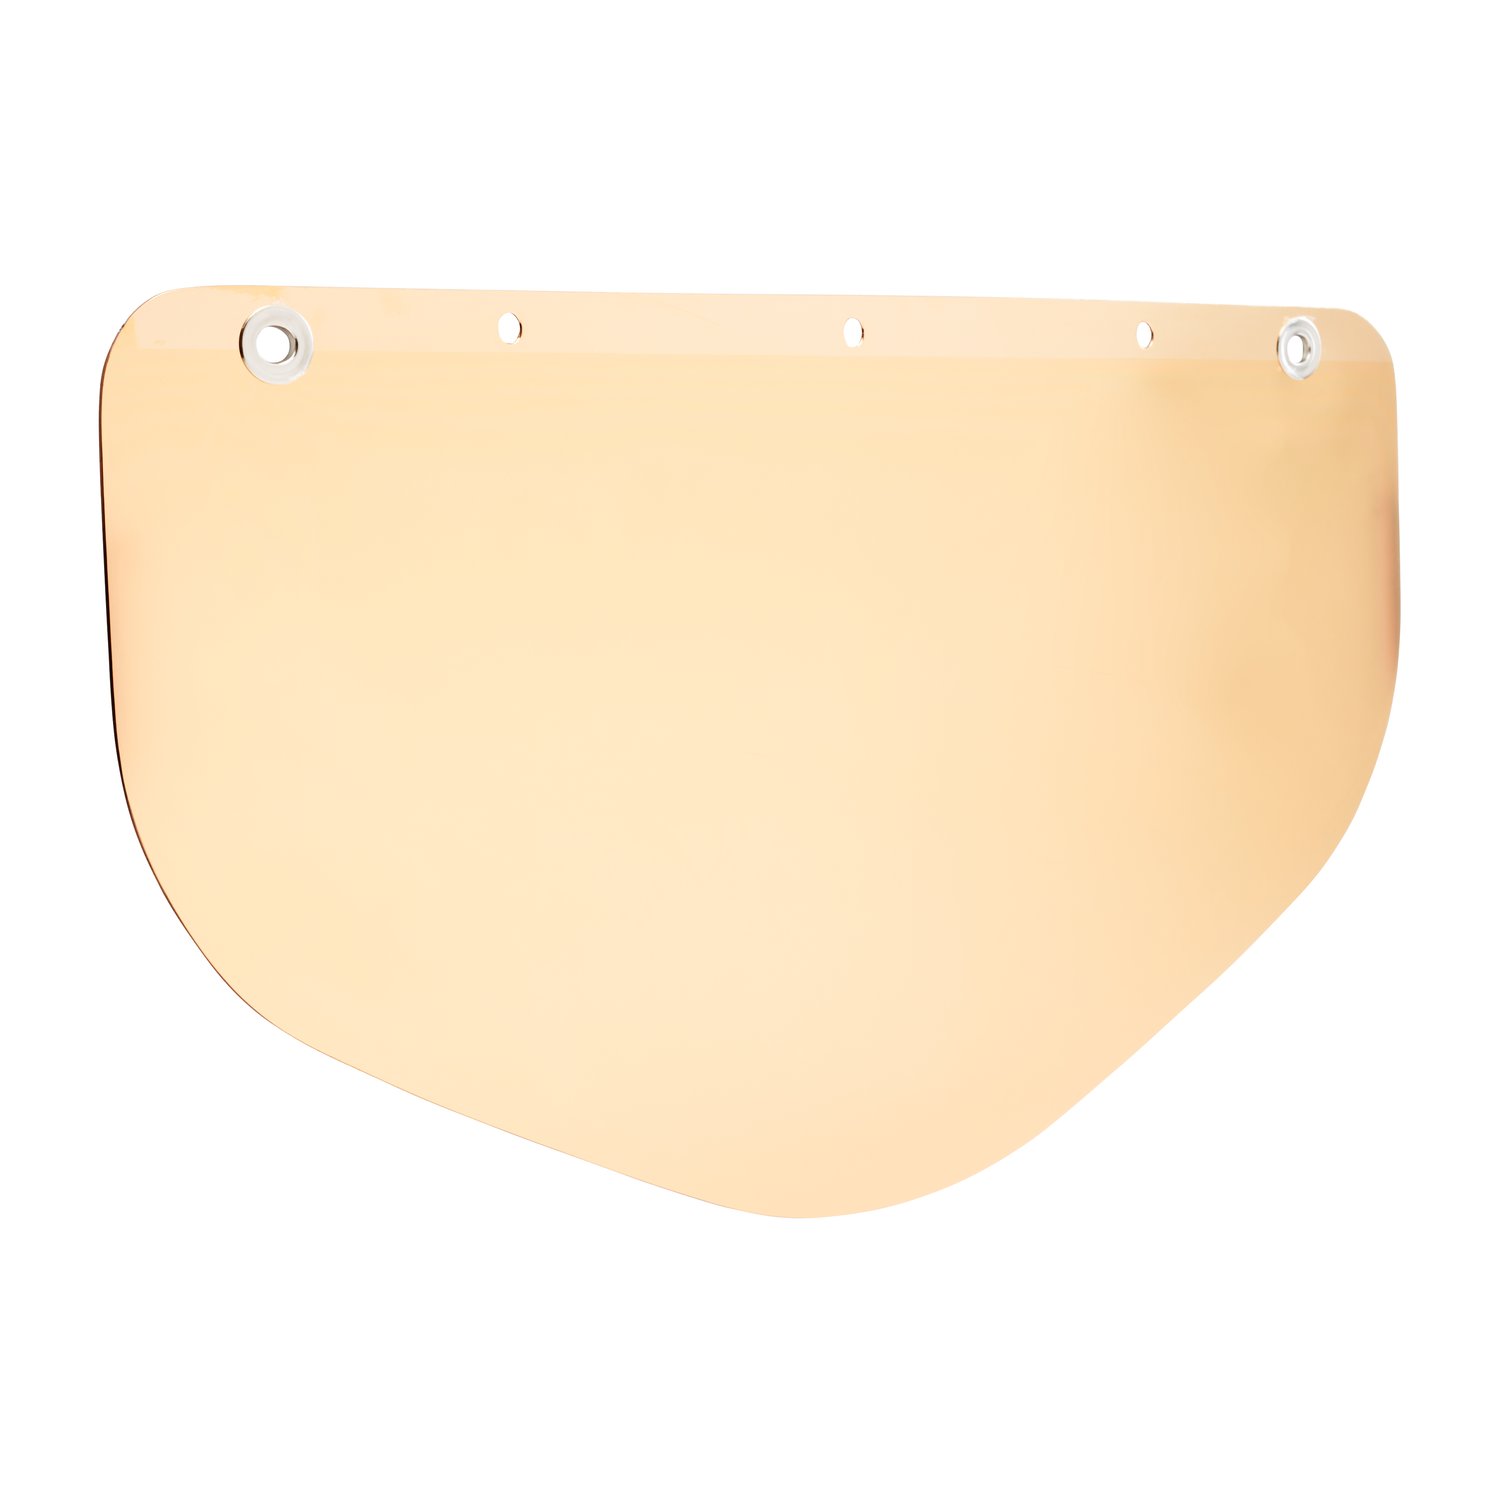 7100154128 - 3M Versaflo Gold Coated Tinted Over-Visor with UV/IR Protection
M-967N, 1 EA/Case